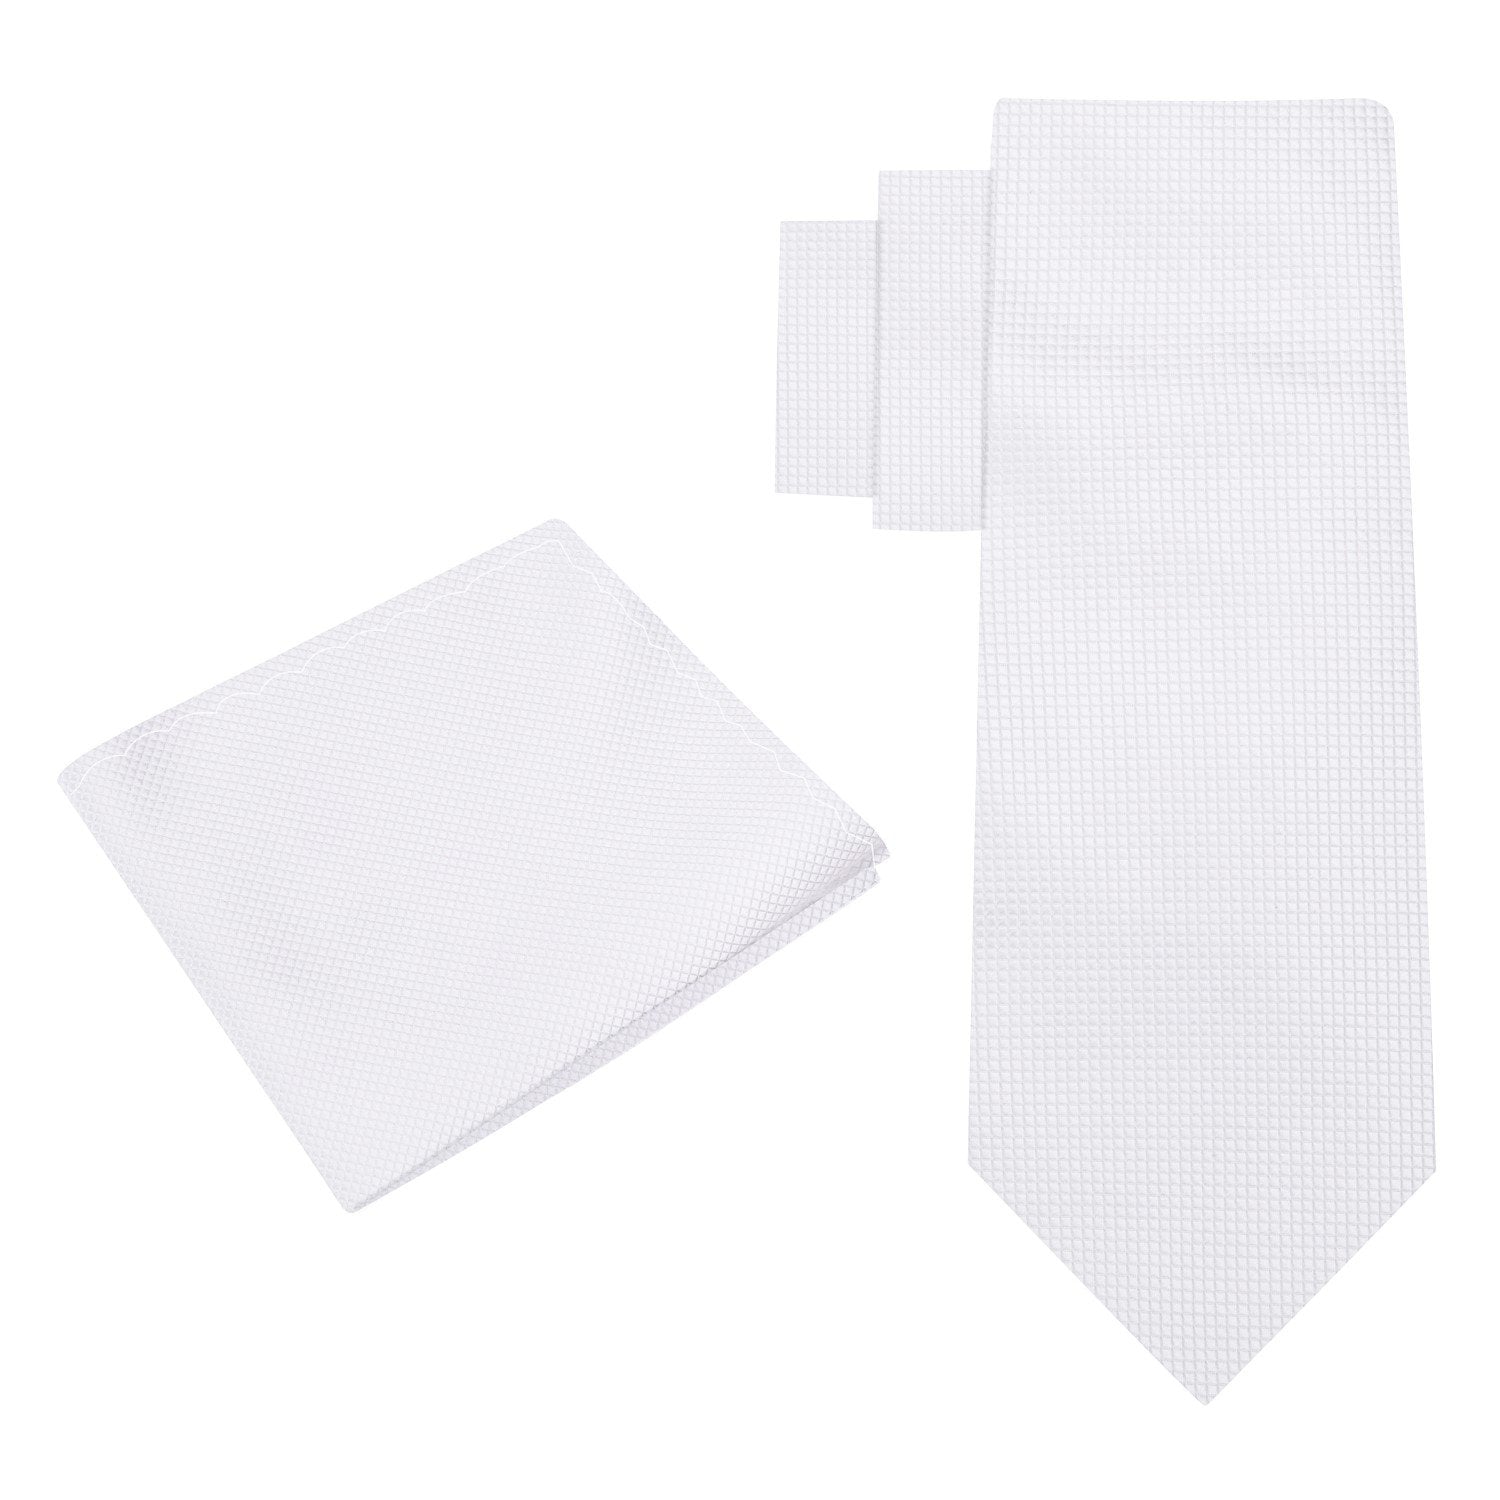 Alt View: A Solid White With Check Texture Pattern Silk Necktie, Matching Pocket Square